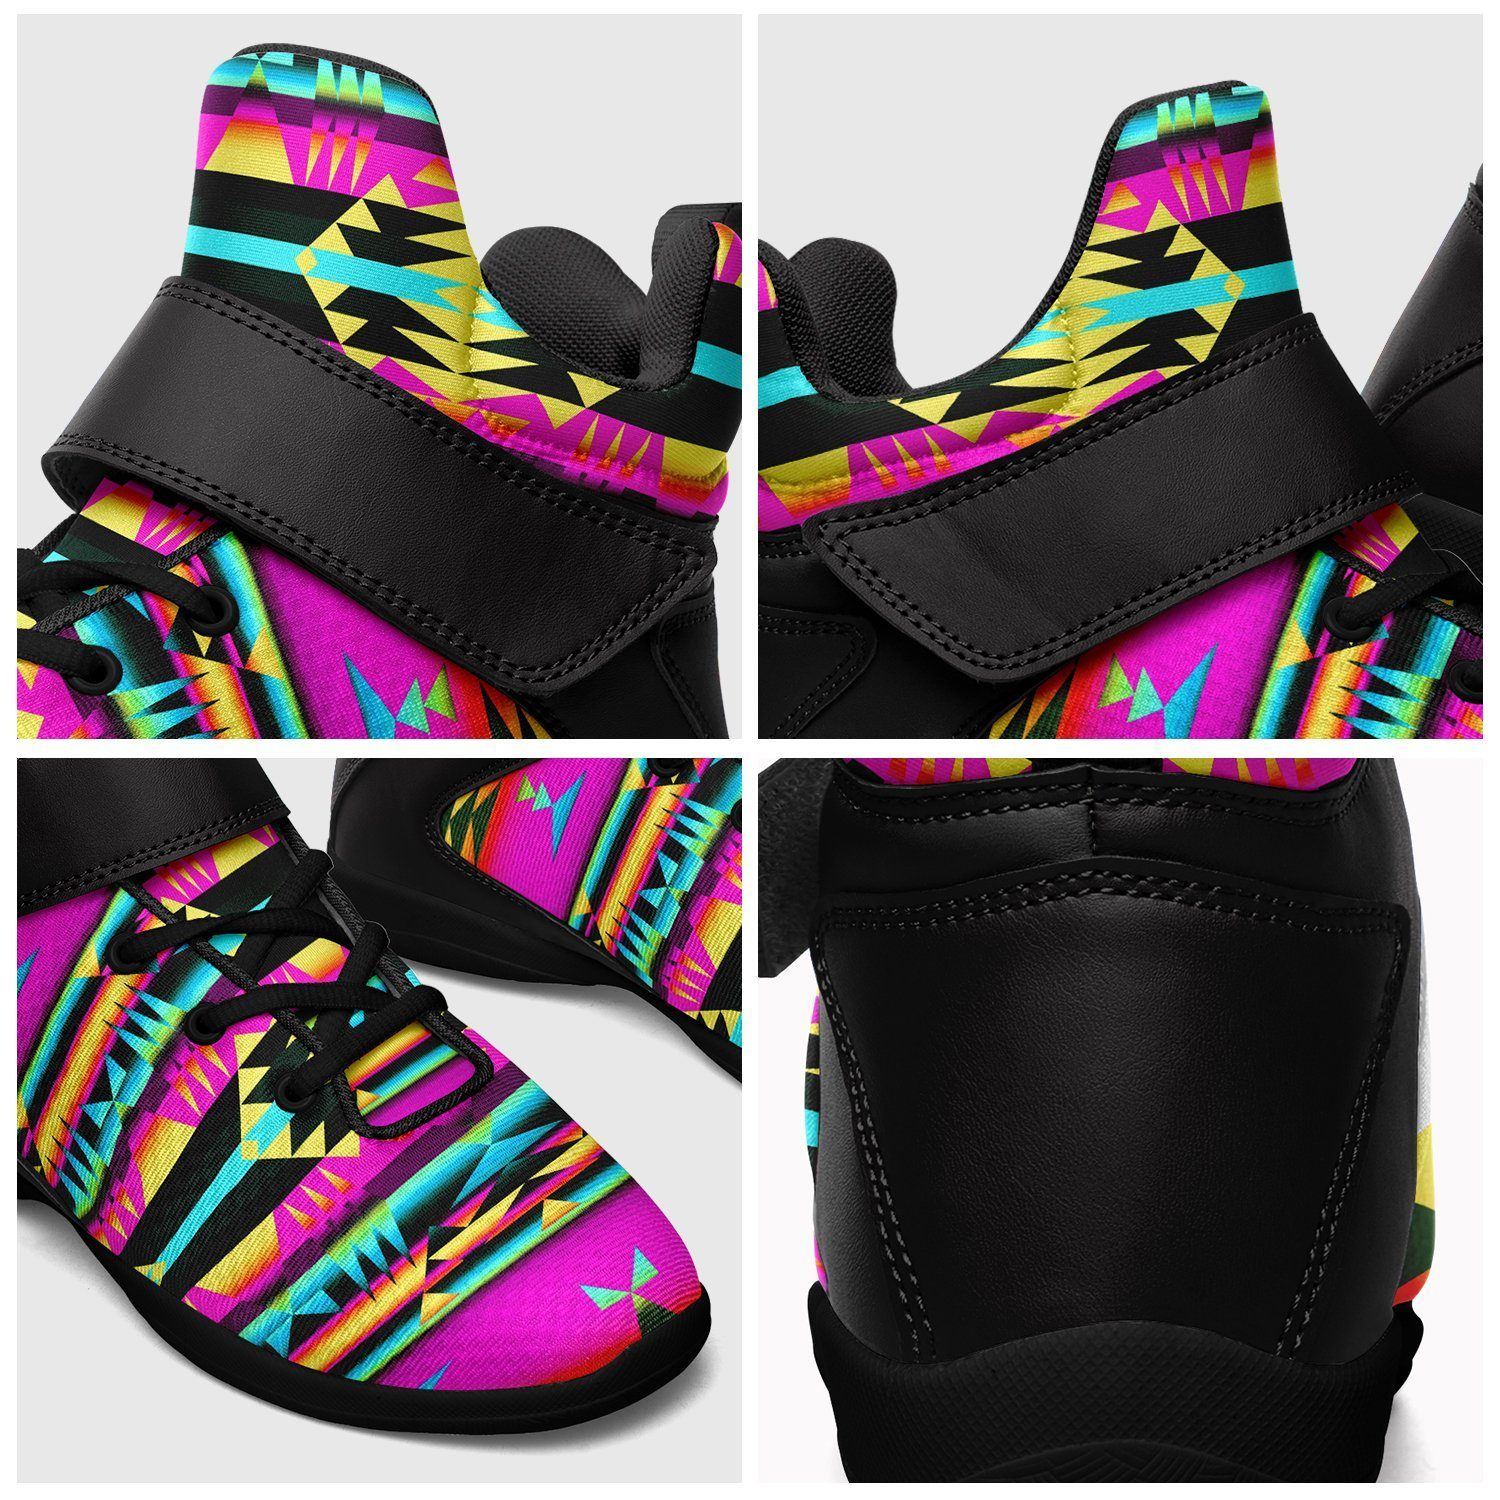 Between the Sunset Mountains Ipottaa Basketball / Sport High Top Shoes - Black Sole 49 Dzine 